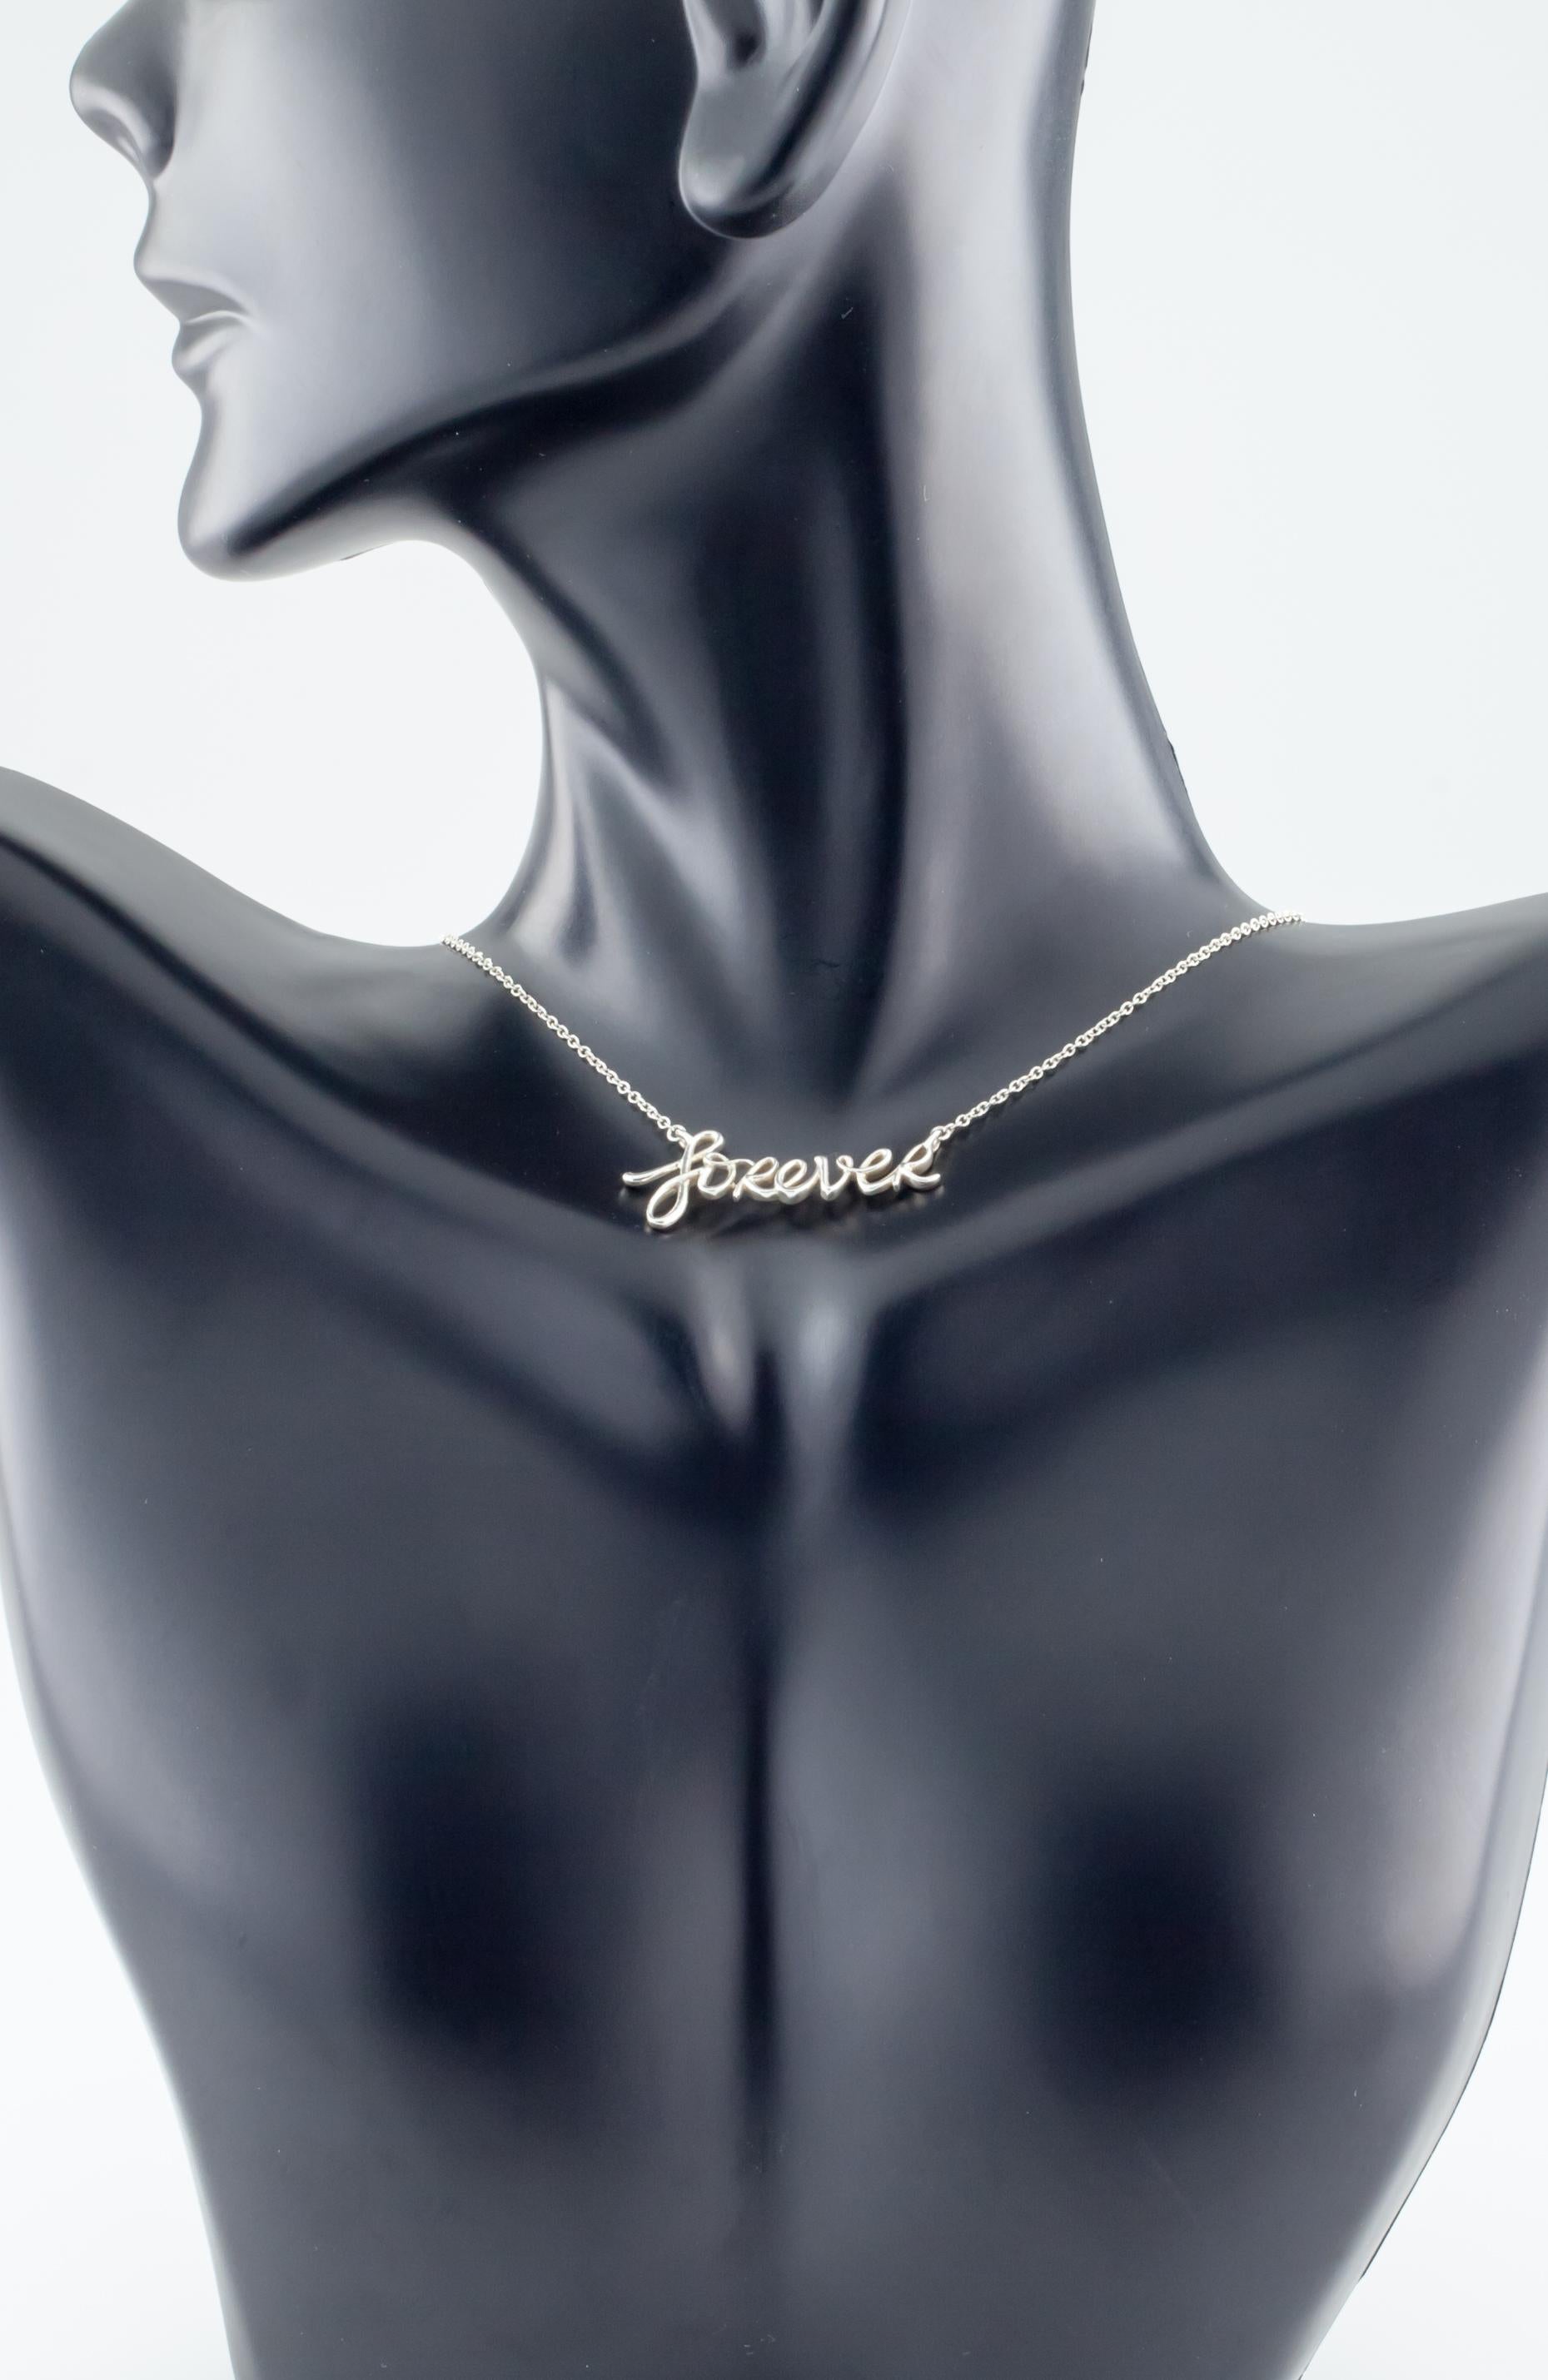 Gorgeous Tiffany & Co. Sterling Silver Pendant by Paloma Picasso
Graffiti Design Reads 